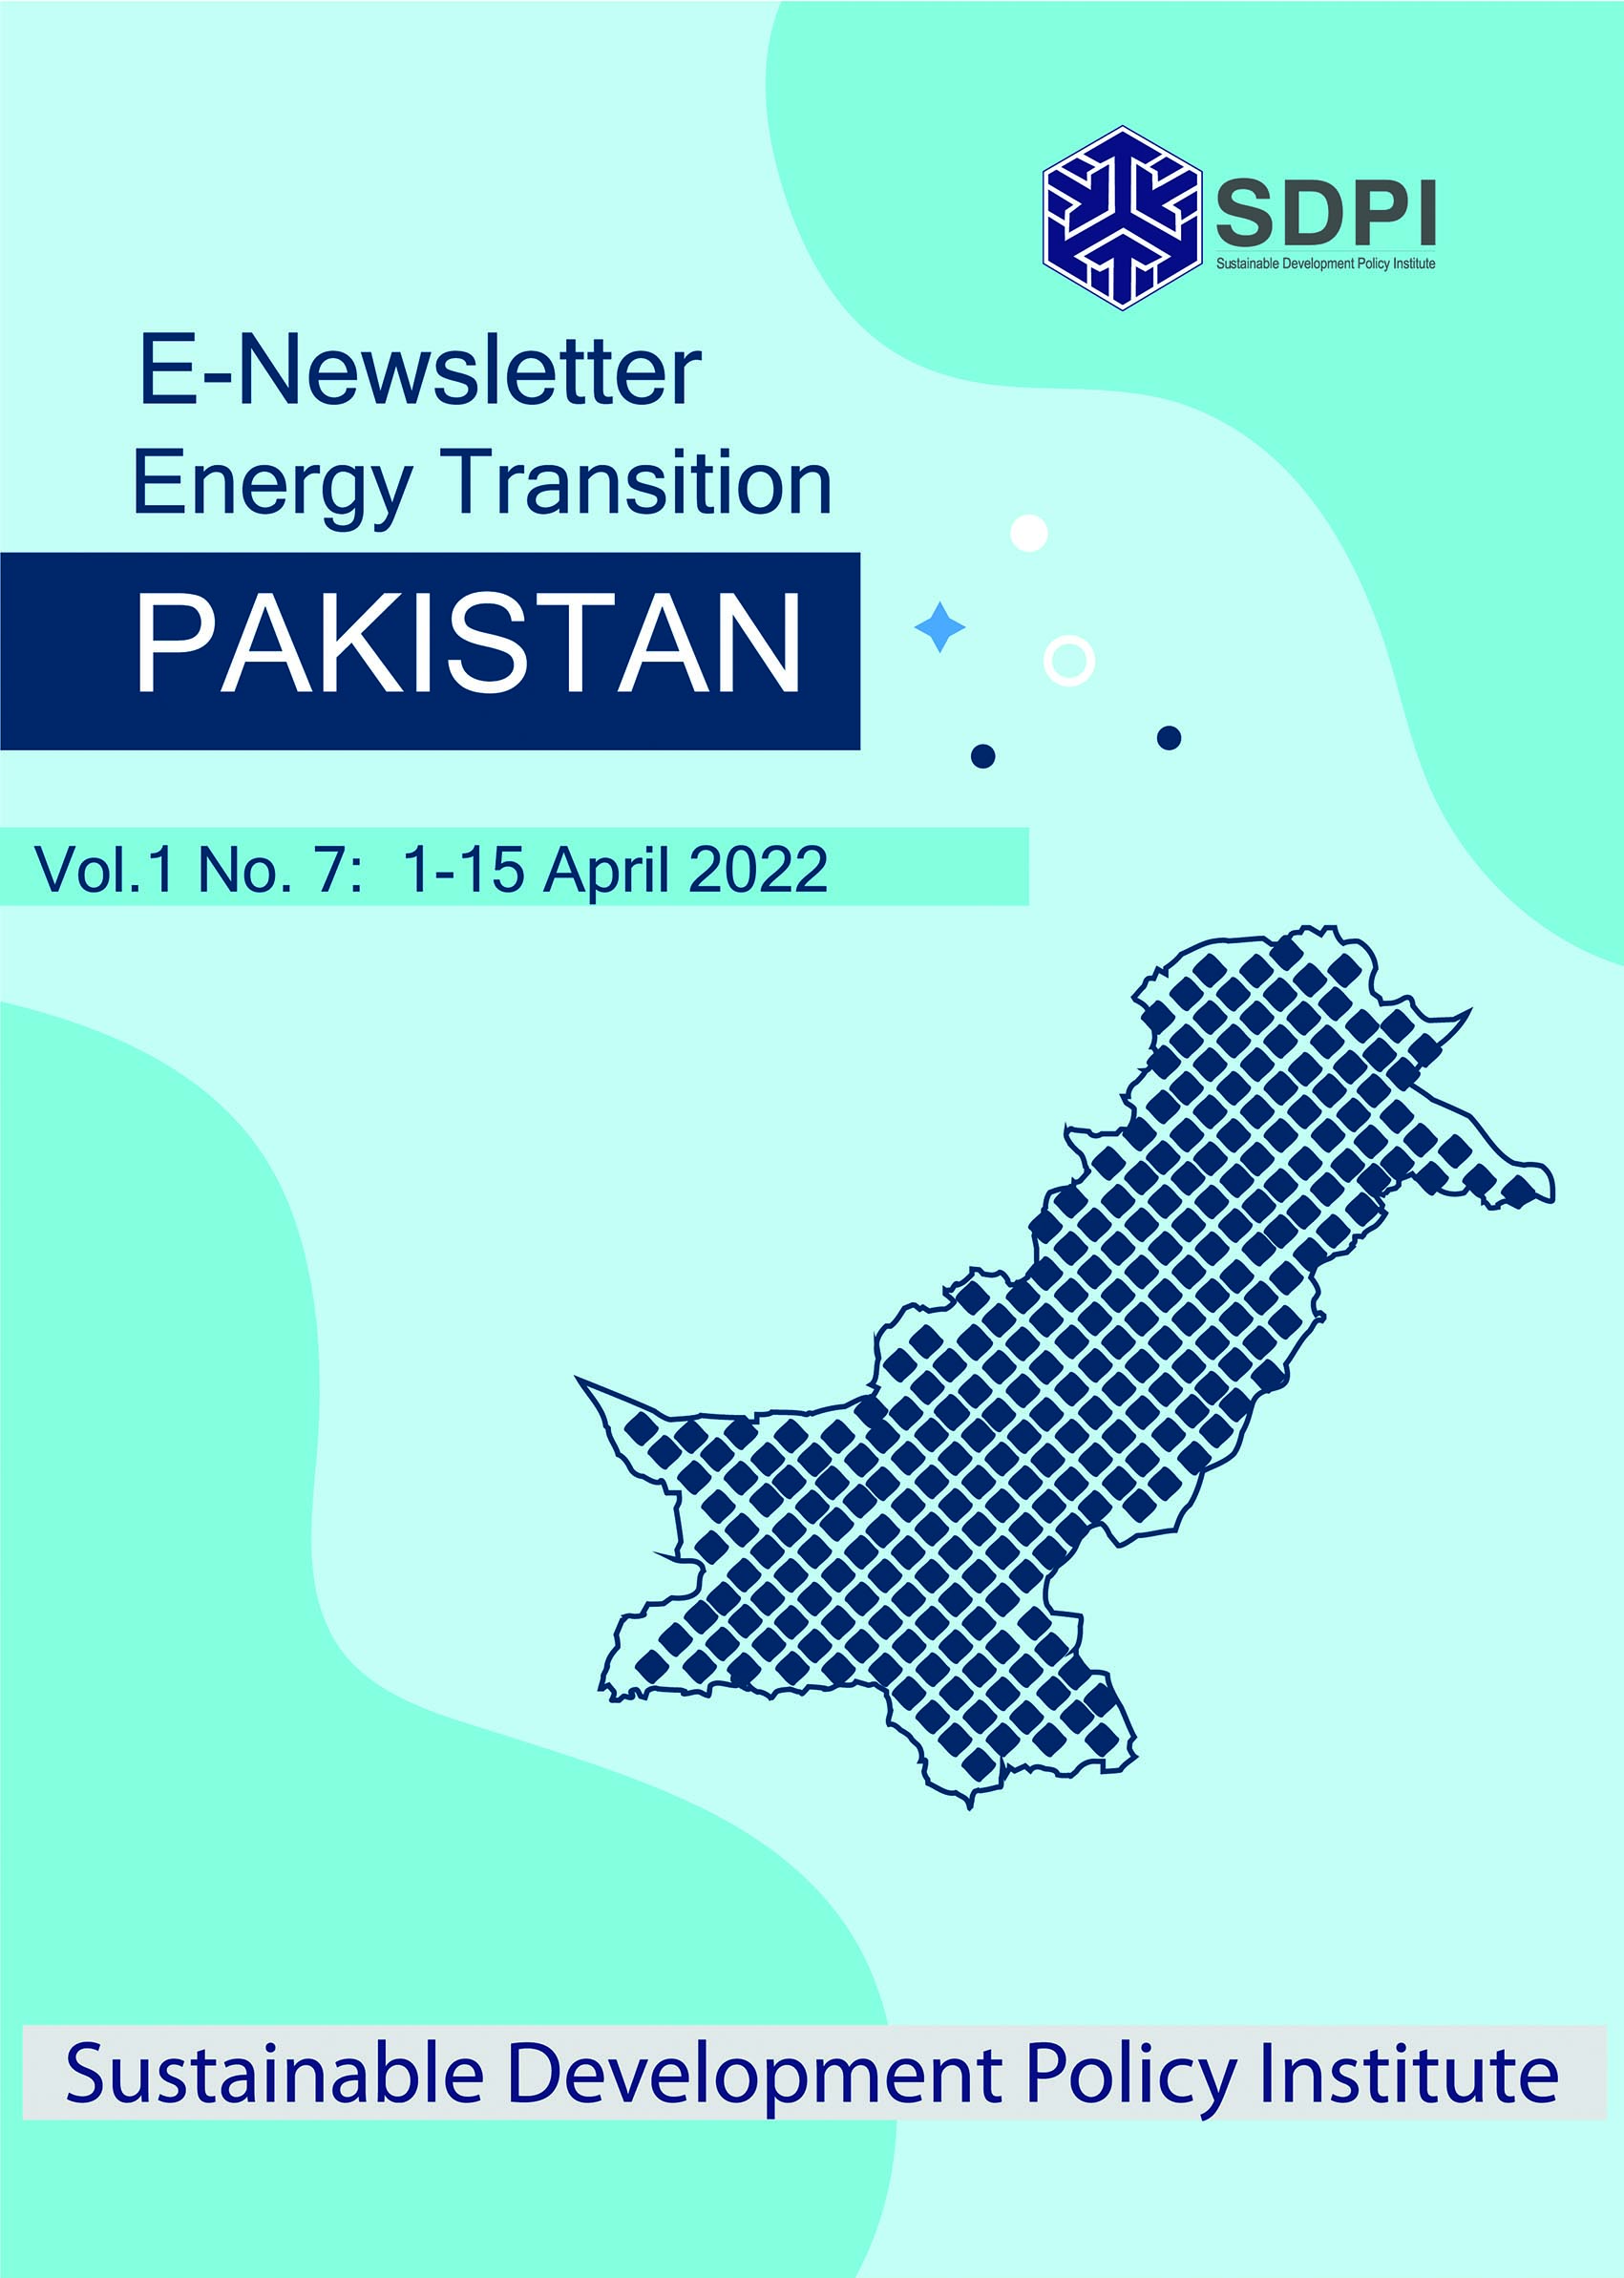 E-Newsletter on Energy Transition Pakistan Vol. 1. No. 7. Issue 1-15-April 2022